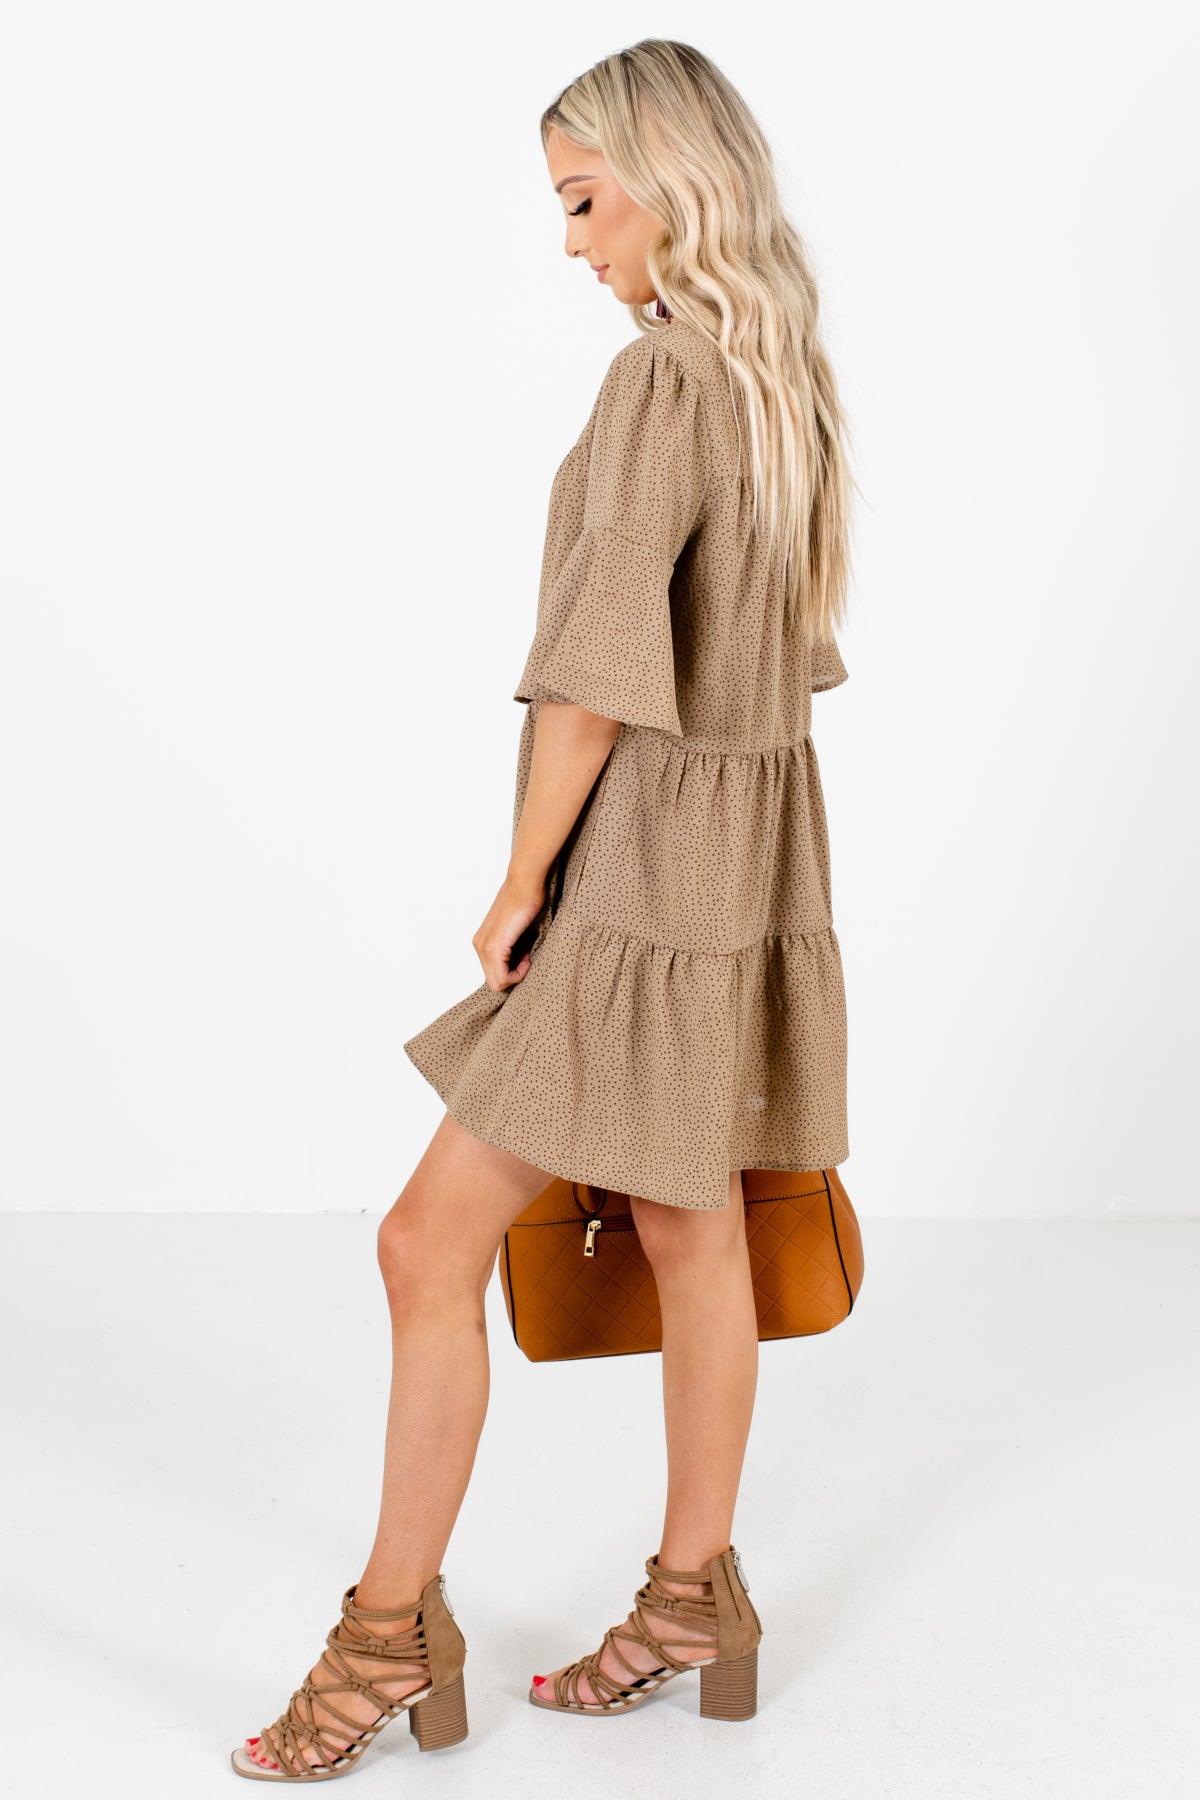 Women's Brown Spring and Summertime Boutique Clothing